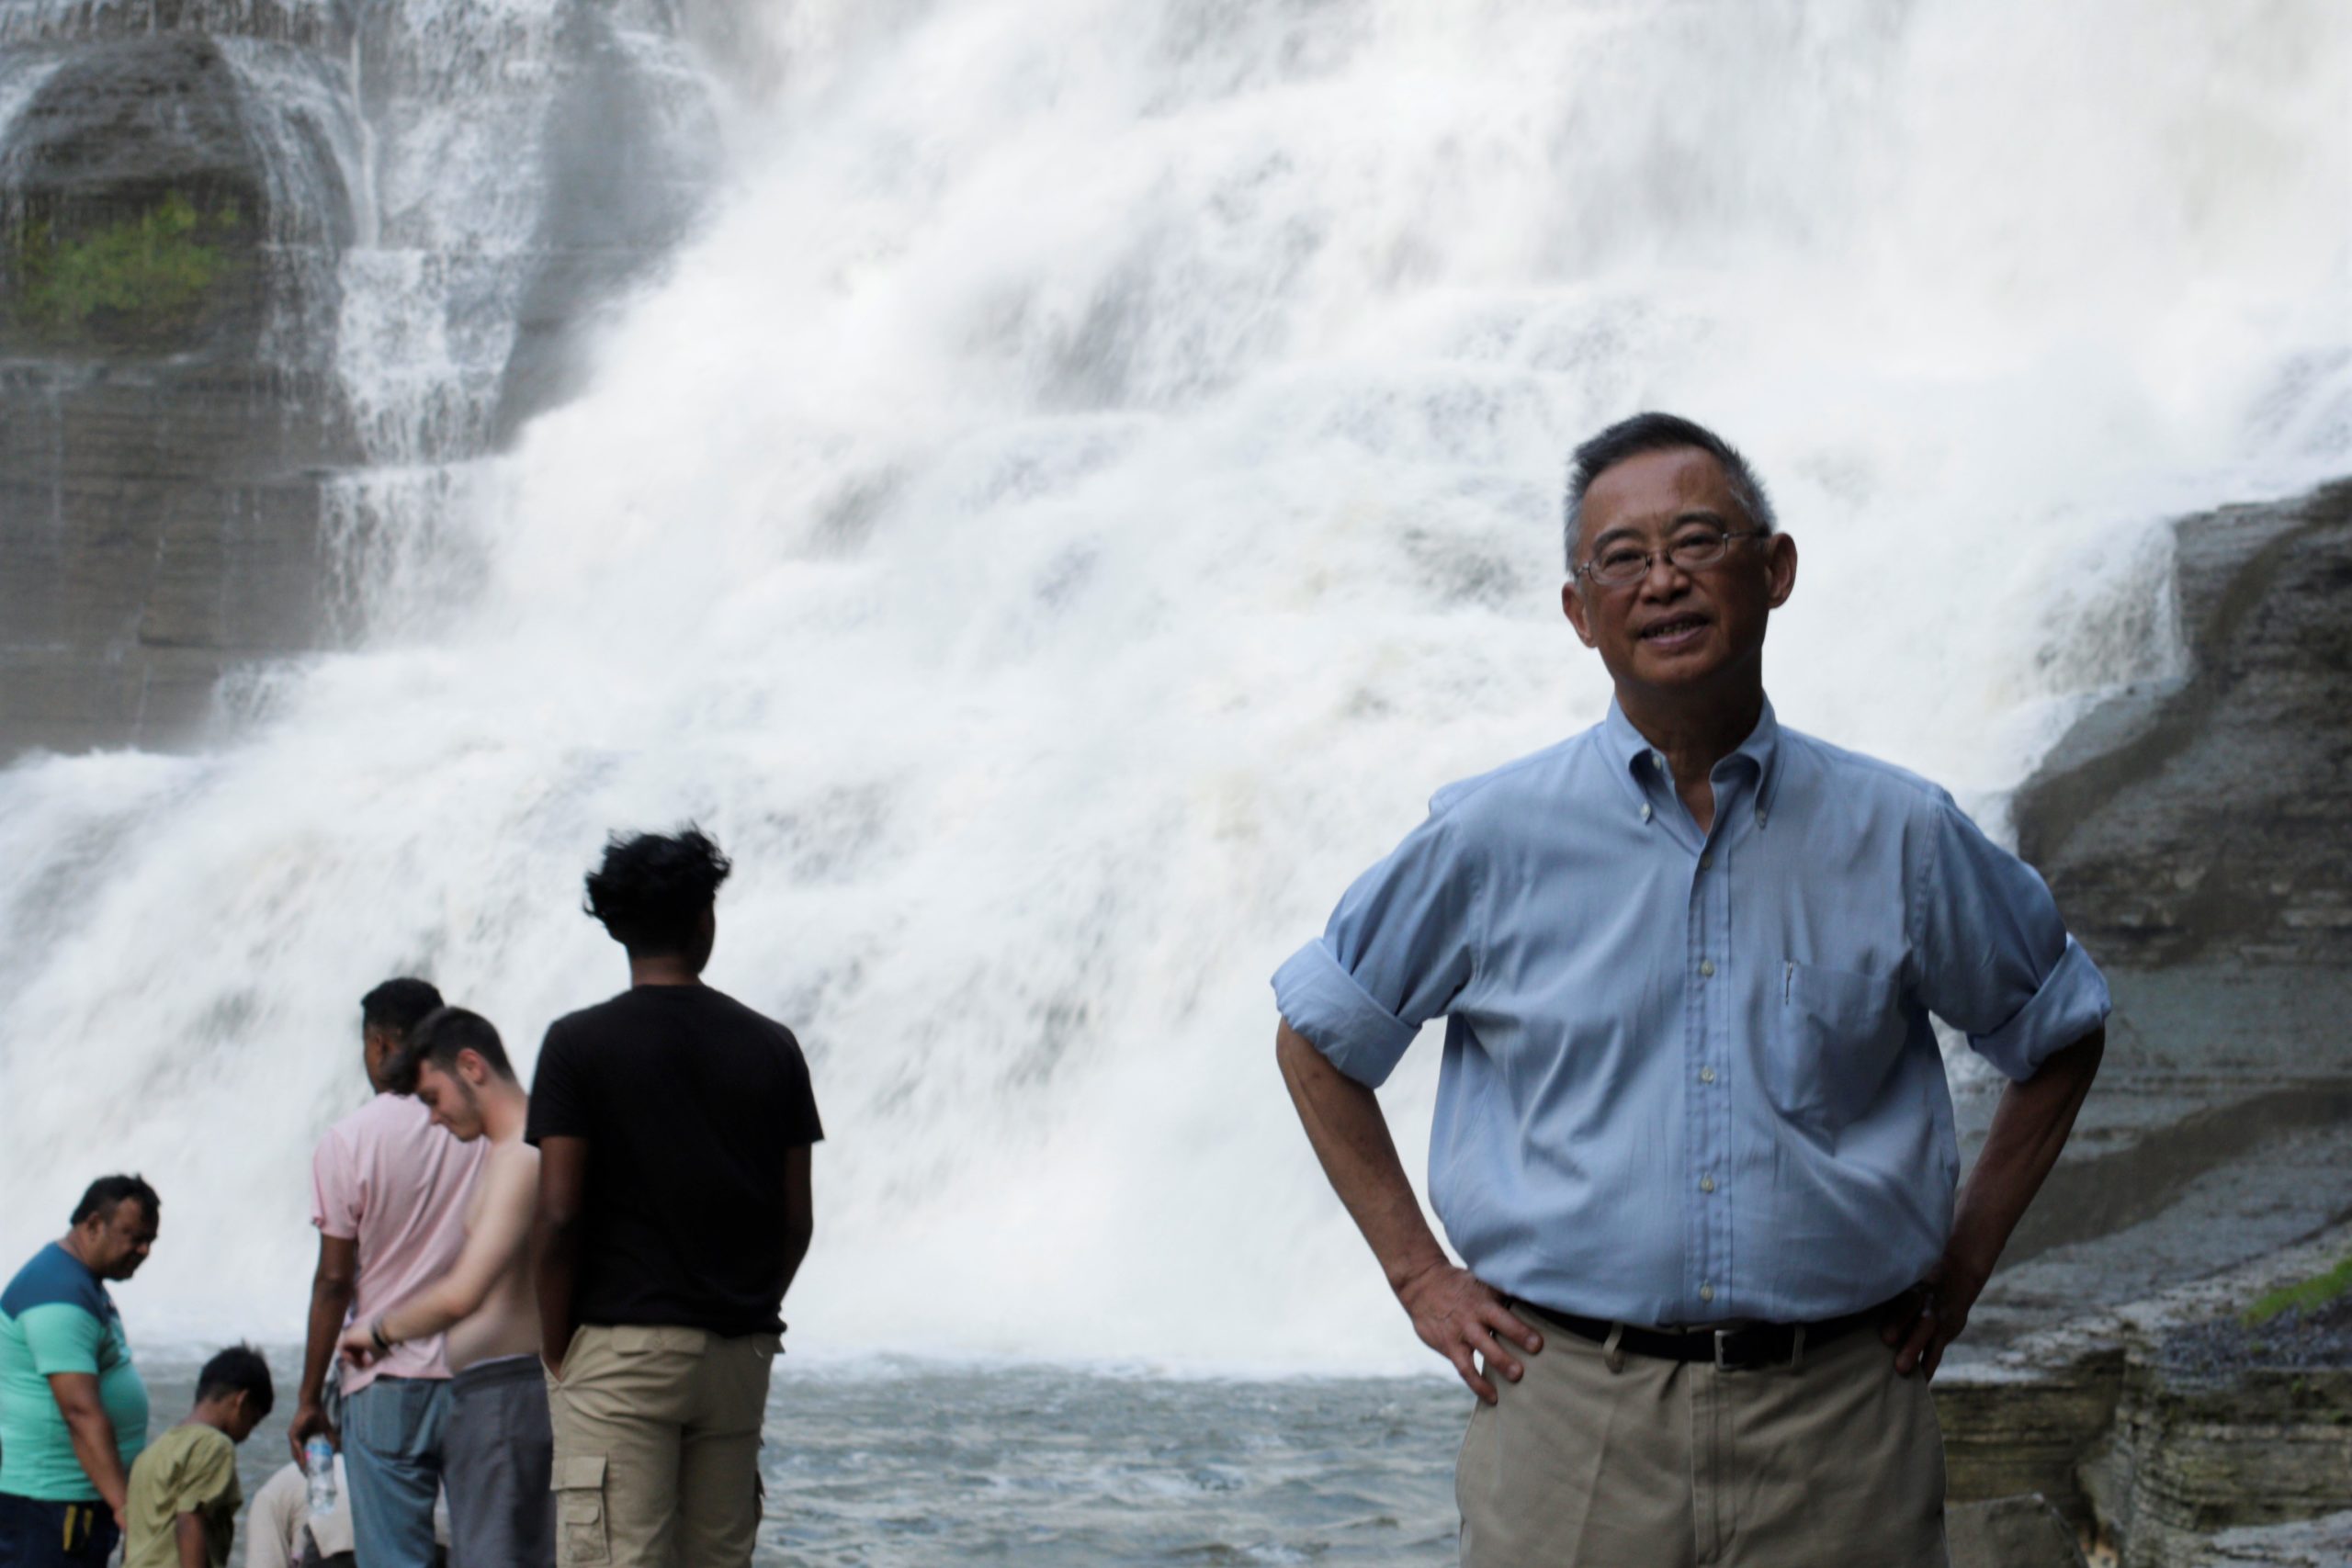 Walter Hang has been calling for a complete remediation of the lead pollution at the Ithaca Falls Natural Area for almost 20 years now. Behind him, people enjoy the falls, stepping into the water. They are seemingly unperturbed by, or unaware of, the lead pollution at the site. (Jimmy Jordan / WRFI)